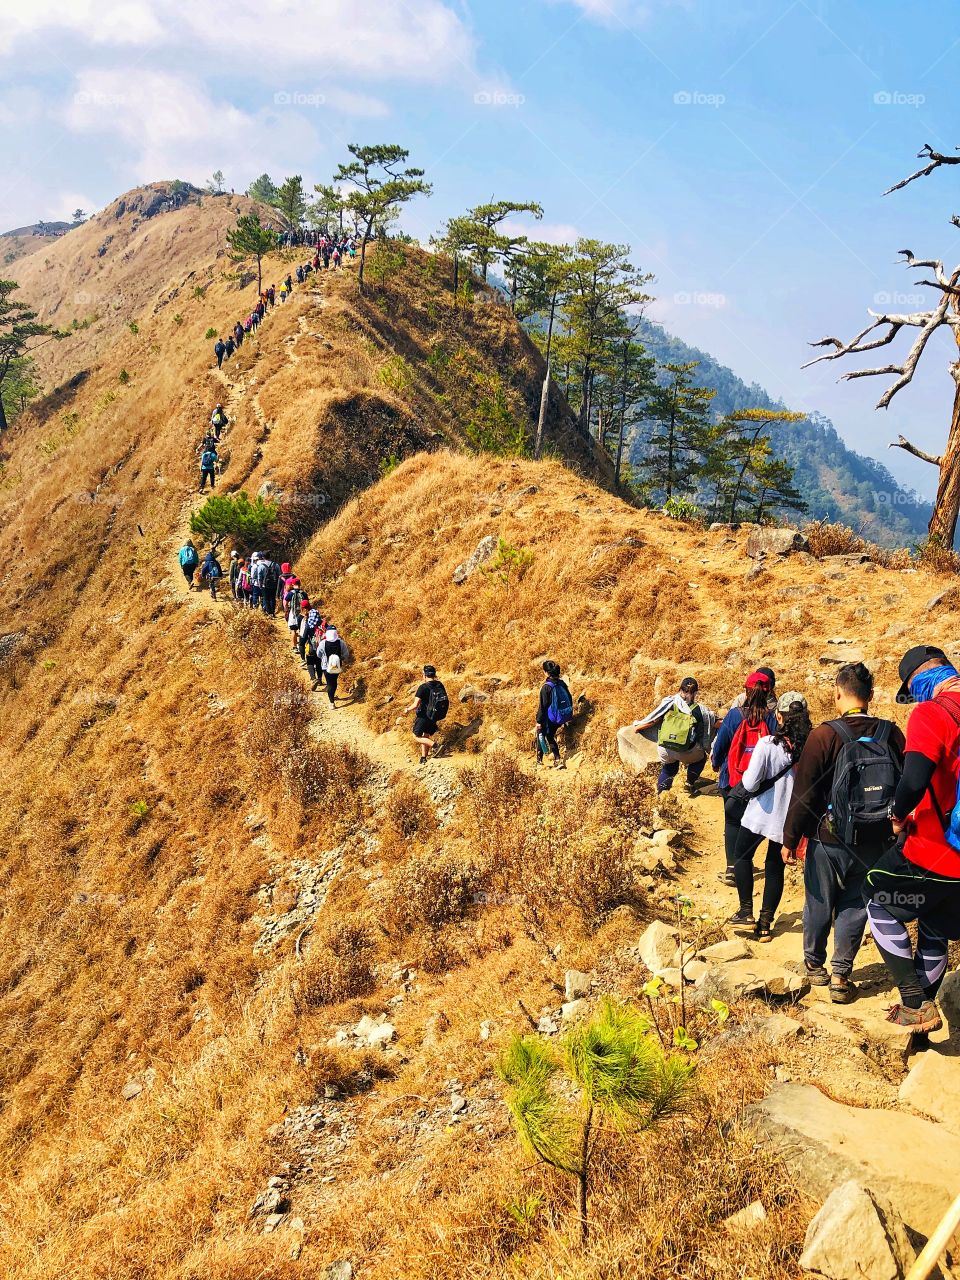 Mt. Ulap is a long hike compared to your usual one. You need more than just strength and stamina to climb up and go down, you need patience. Ulap shouldn't be that hard for experienced hikers and mountaineers. I survived Mt. Ulap! ⛰️💪 (1846 MASL)